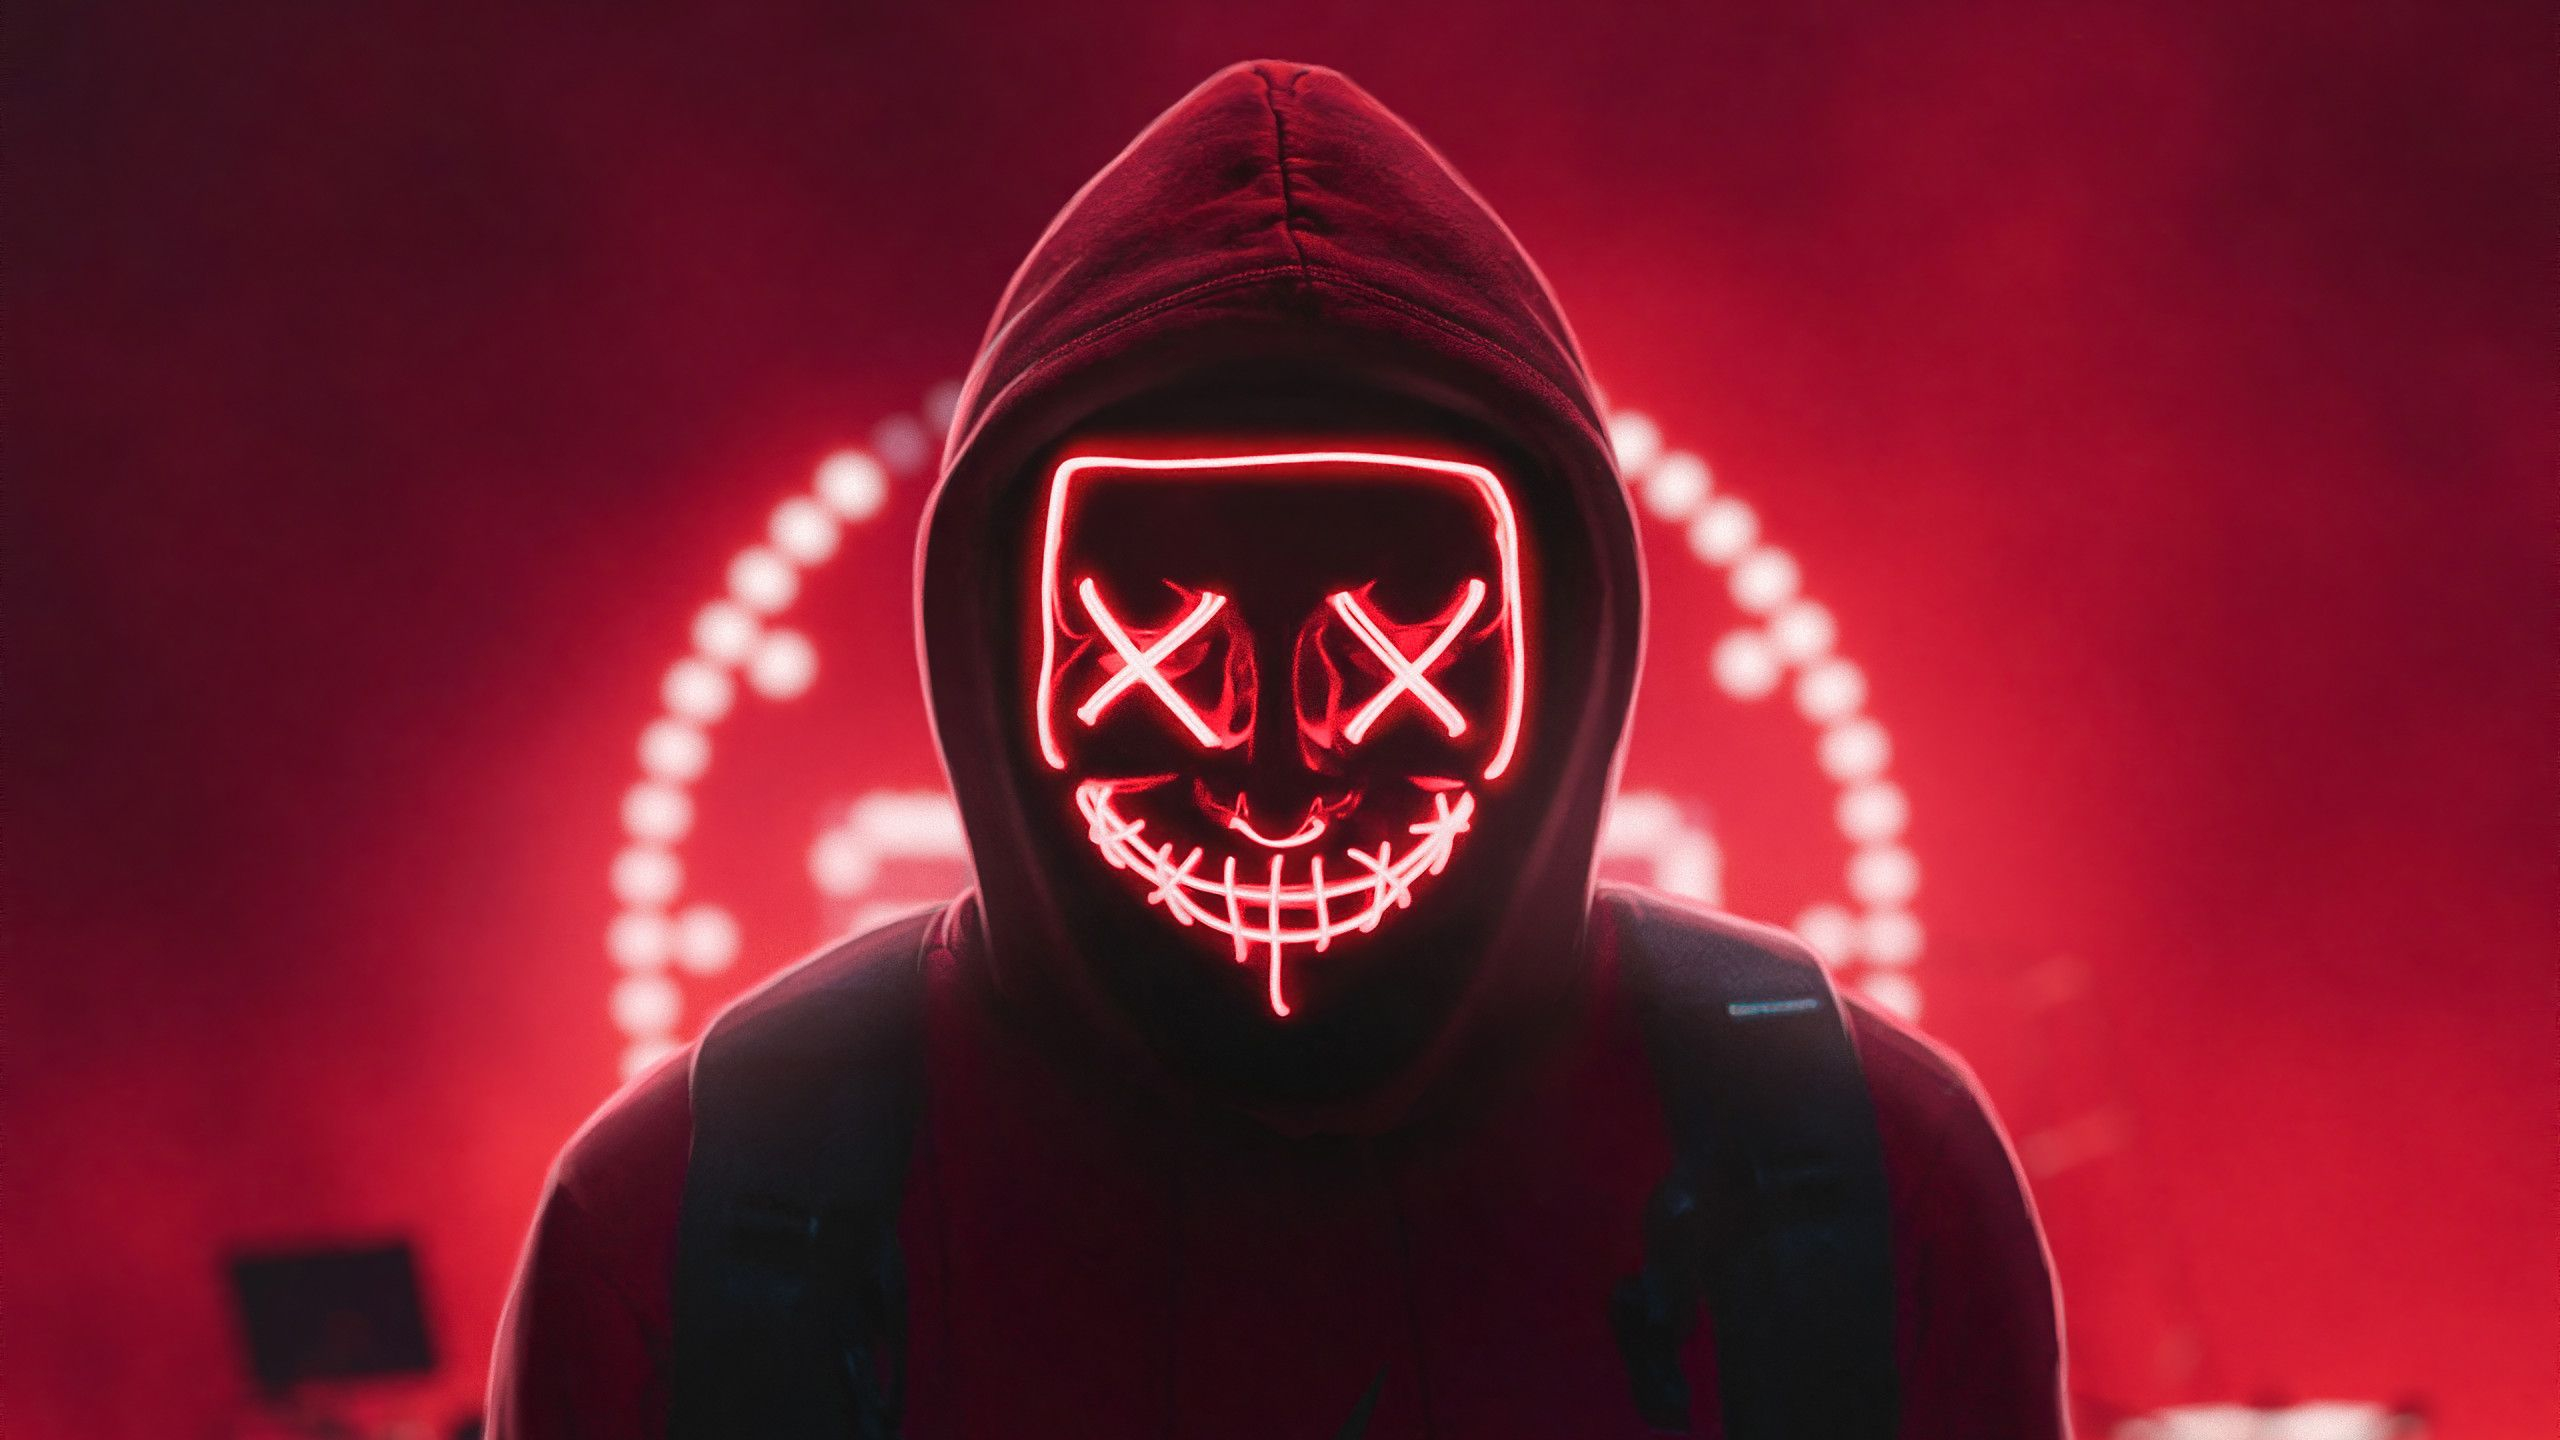 2560x1440 Wallpaper : Red Neon Mask, digital art, LEDs, red, neon, mask, creepy eyes, Photoshop, lights, faceless, hoods, artwork, photomontage MixclubRecords 1860191 HD Wallpapers